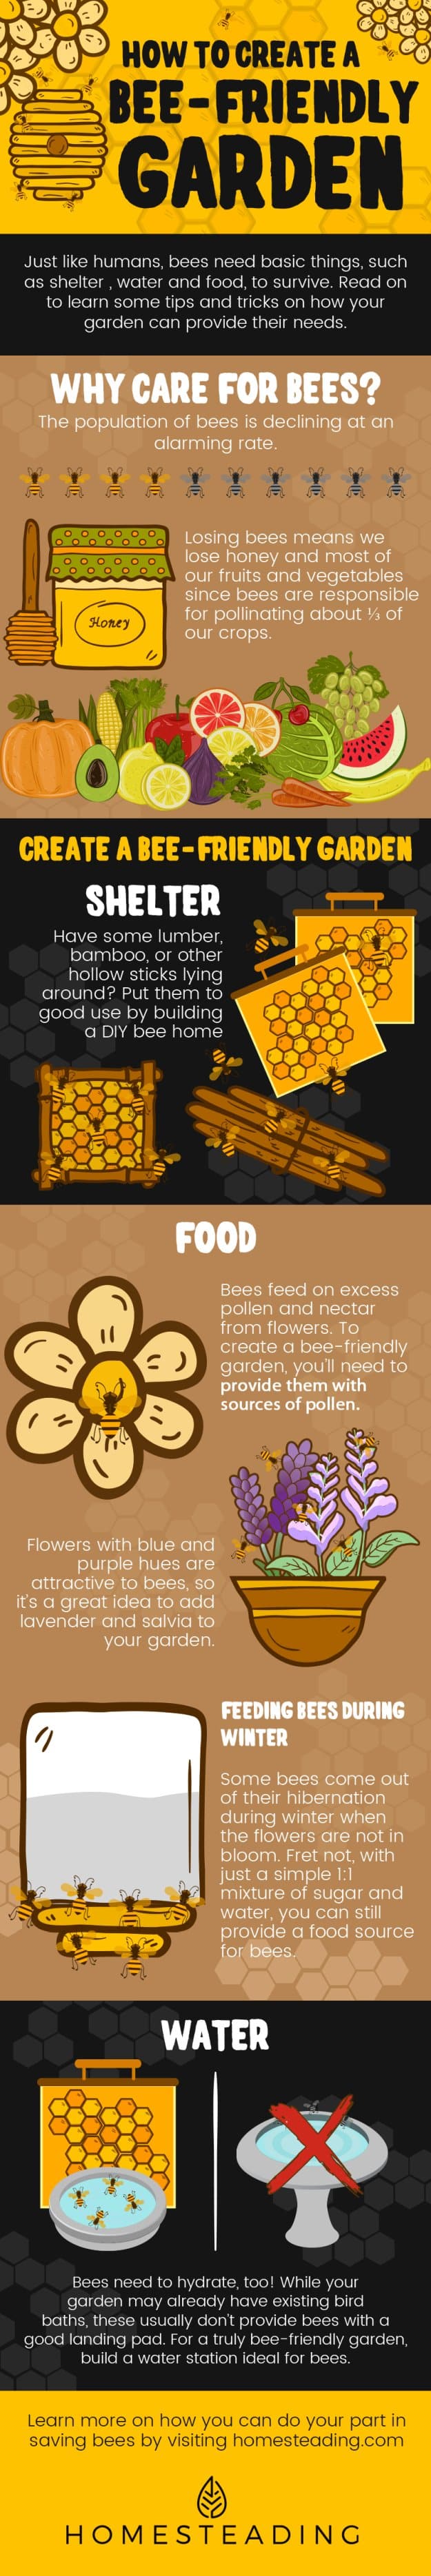 How To Create A Bee-Friendly Garden | Organic Gardening Tips And Ideas